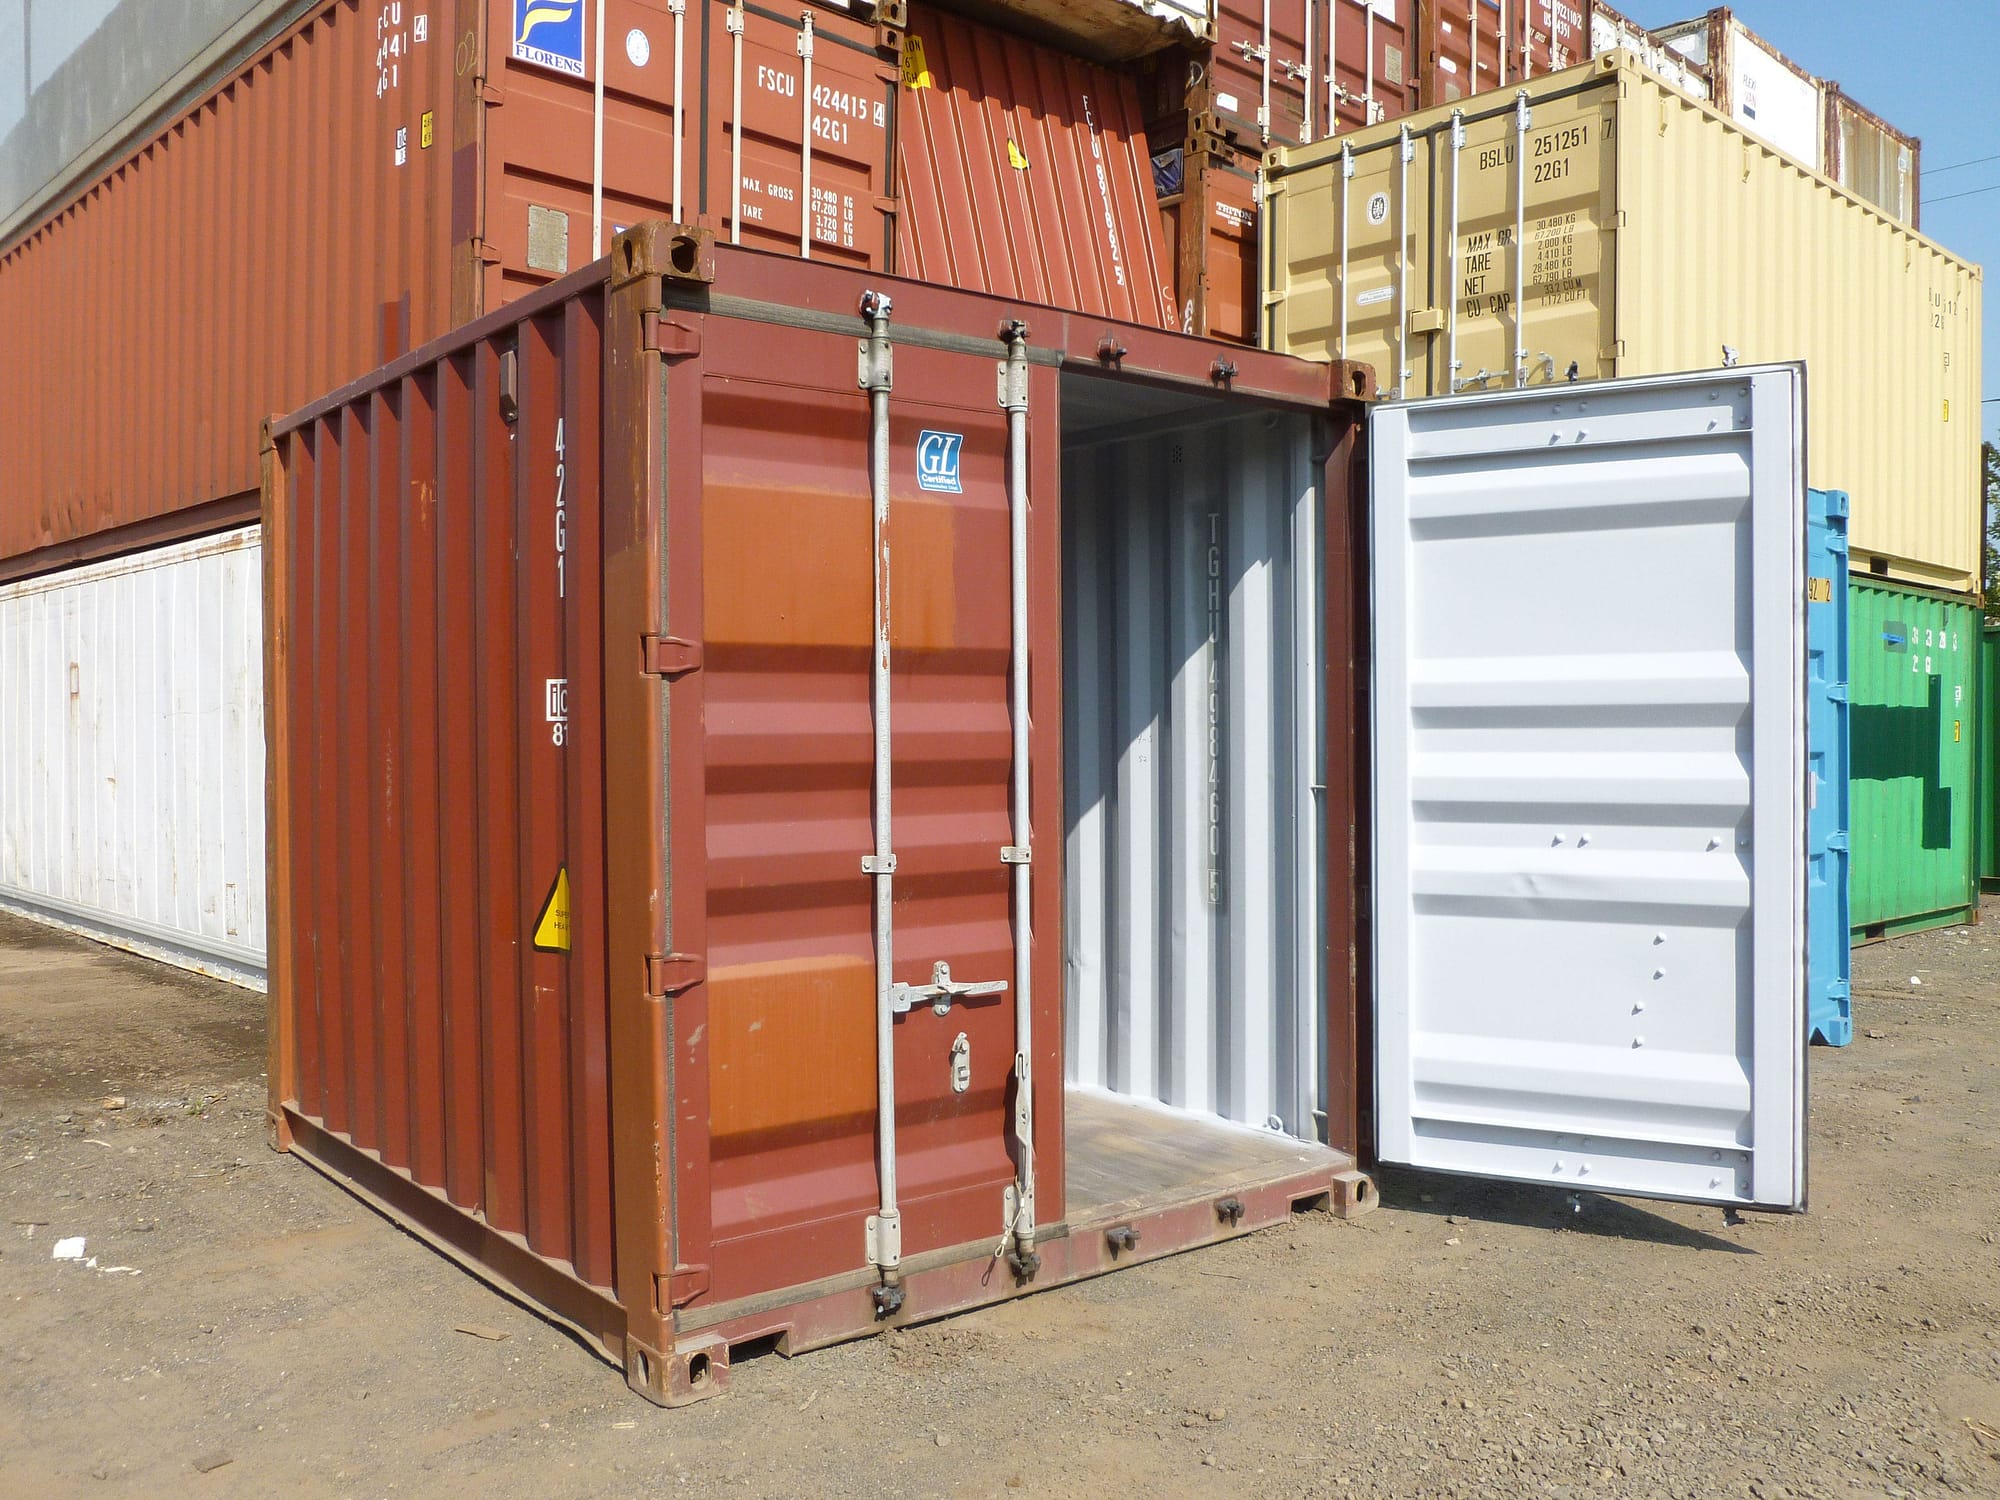 TRS converts steel ISO containers into portable storage space